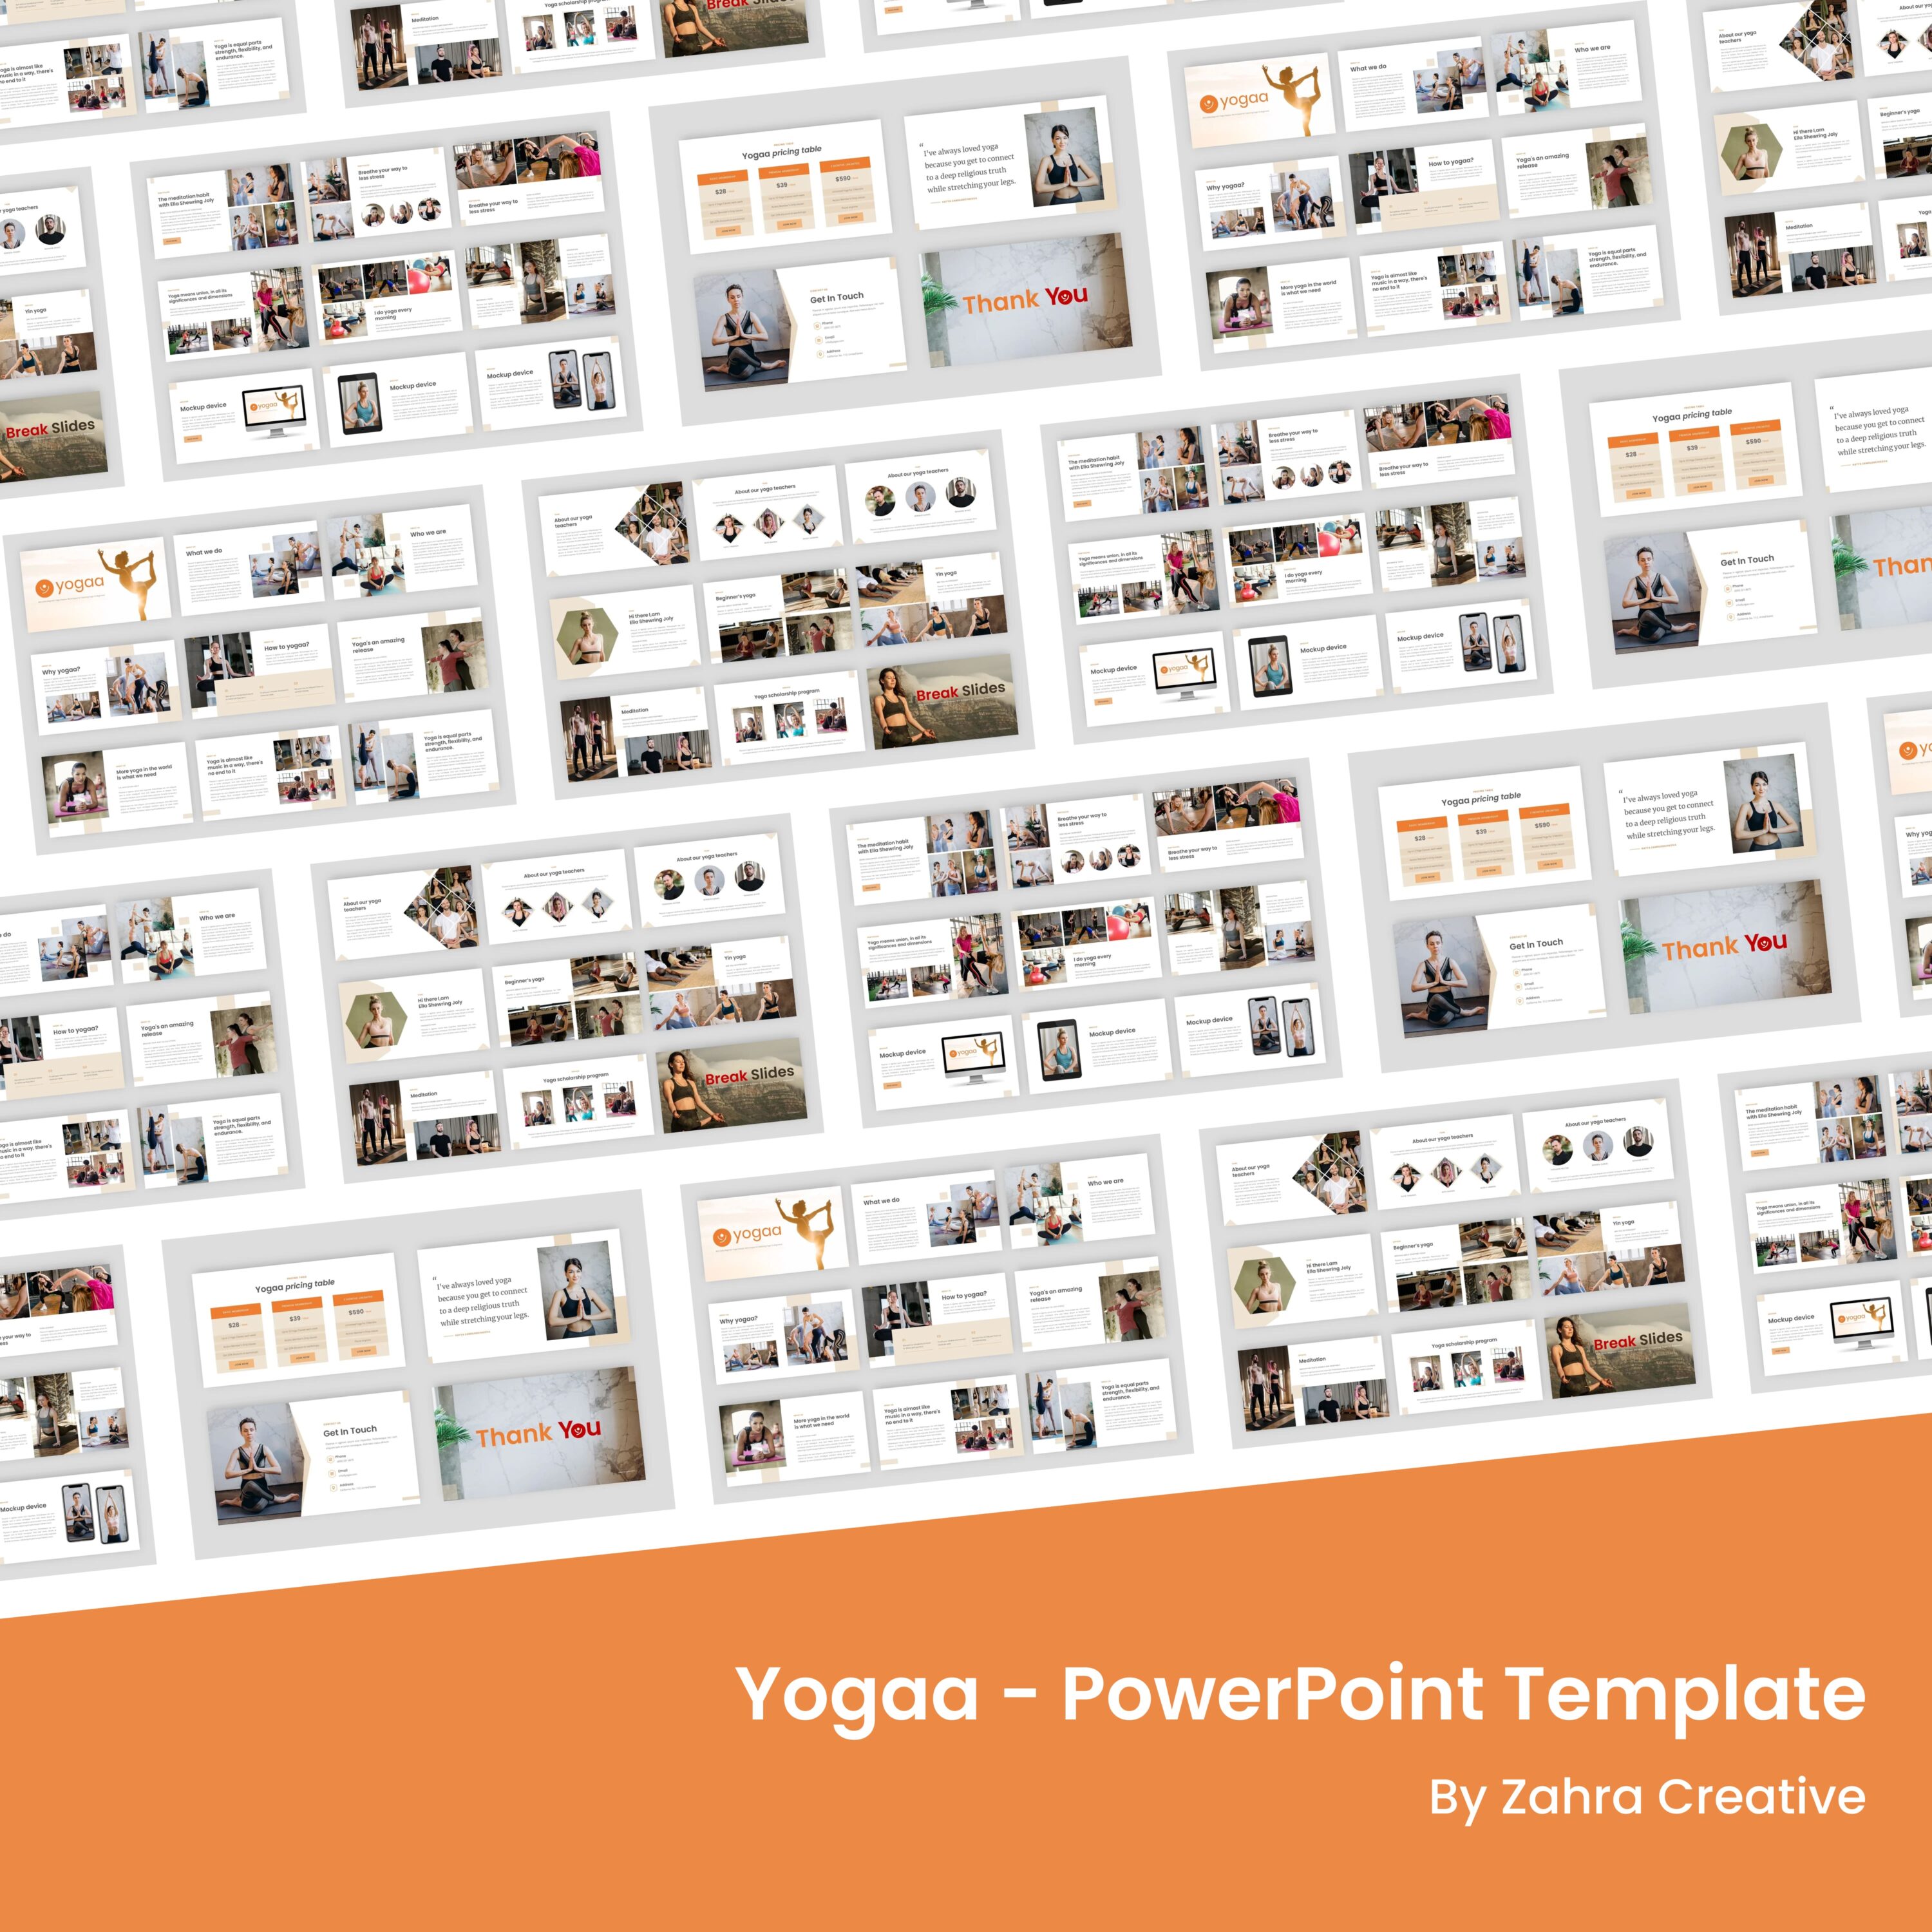 Yogaa Powerpoint Template Preview 1500 2.